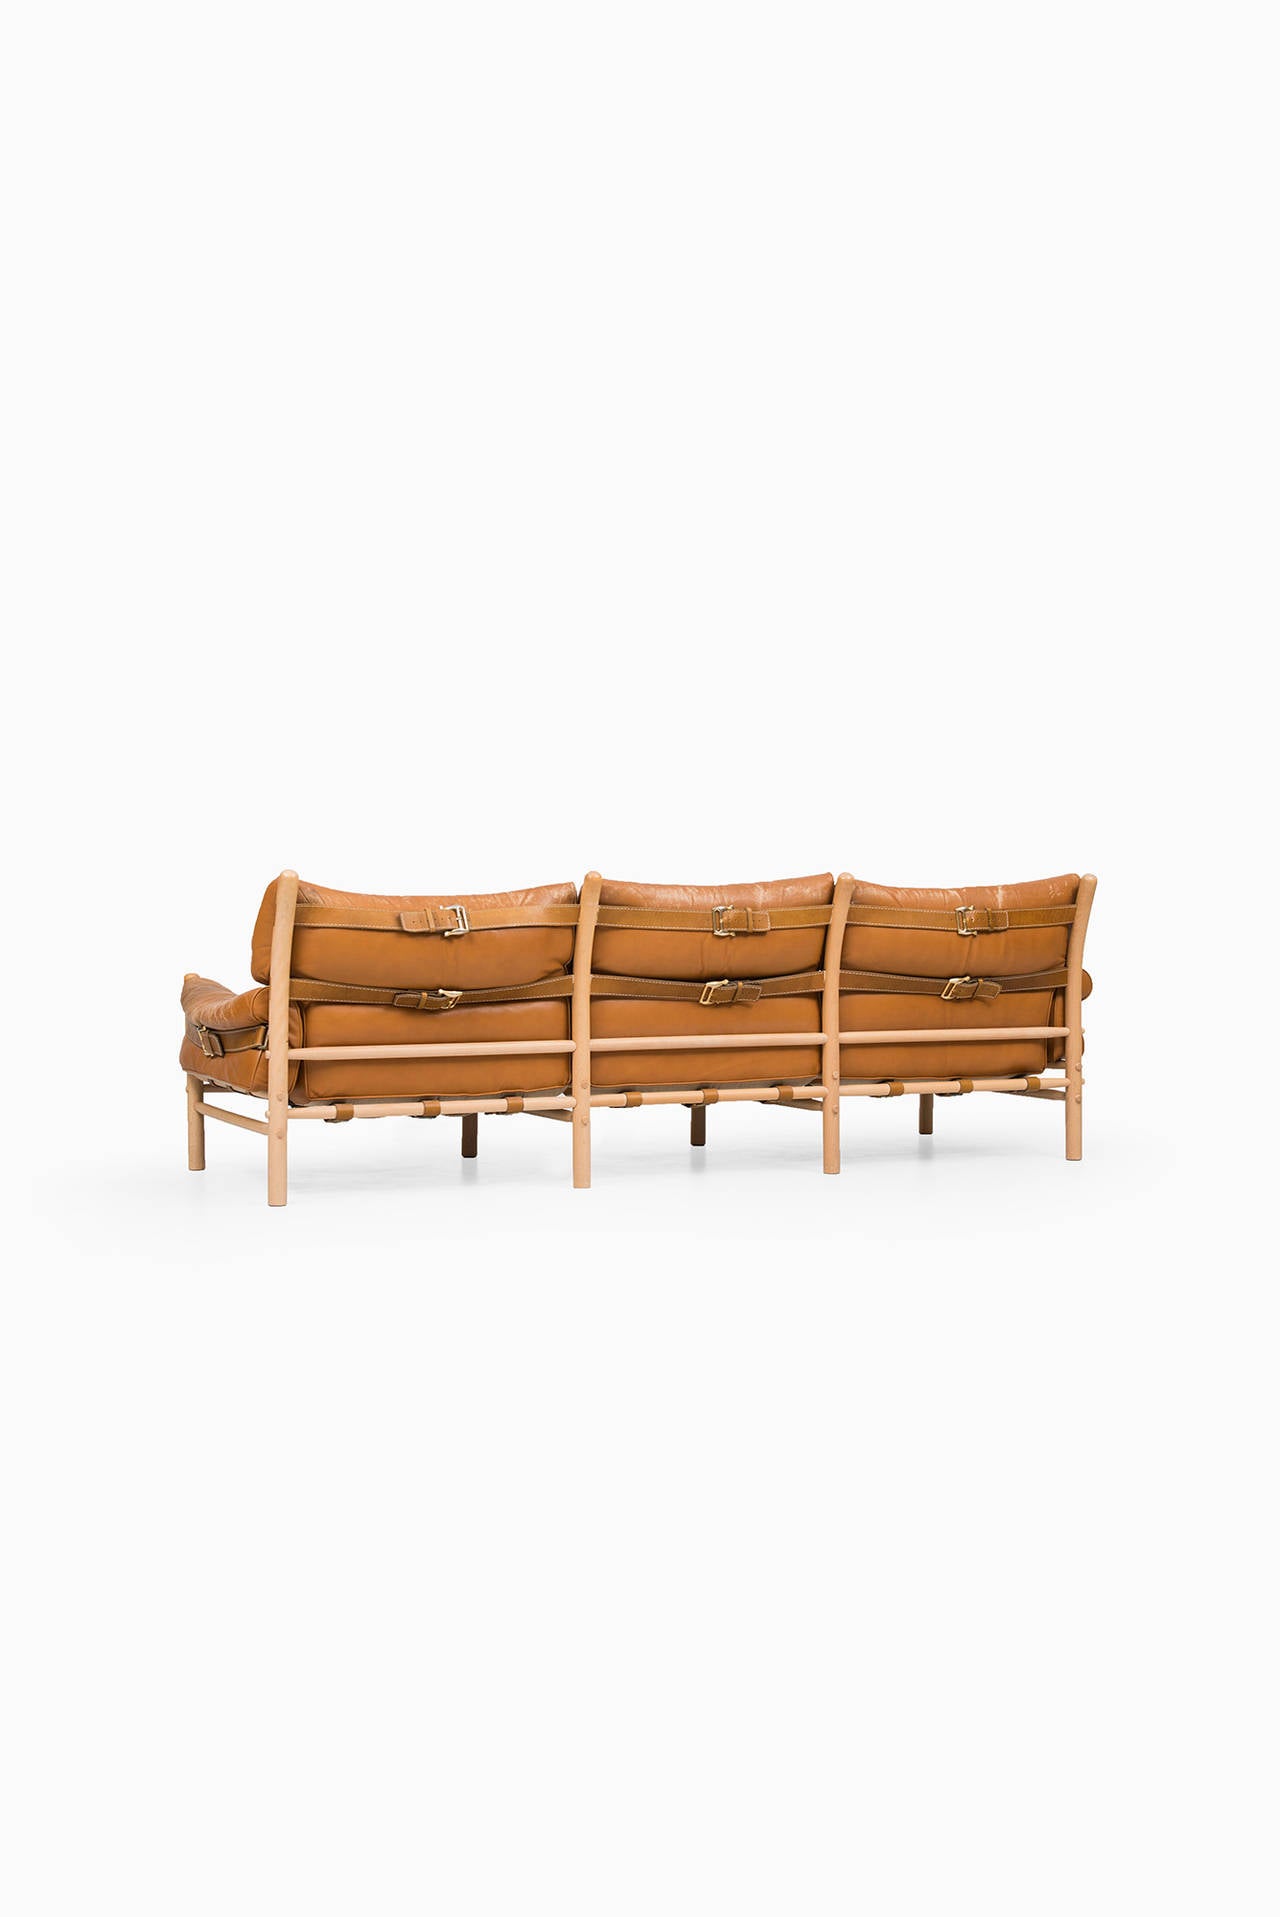 Arne Norell Kontiki sofa by Arne Norell AB in Aneby, Sweden 1